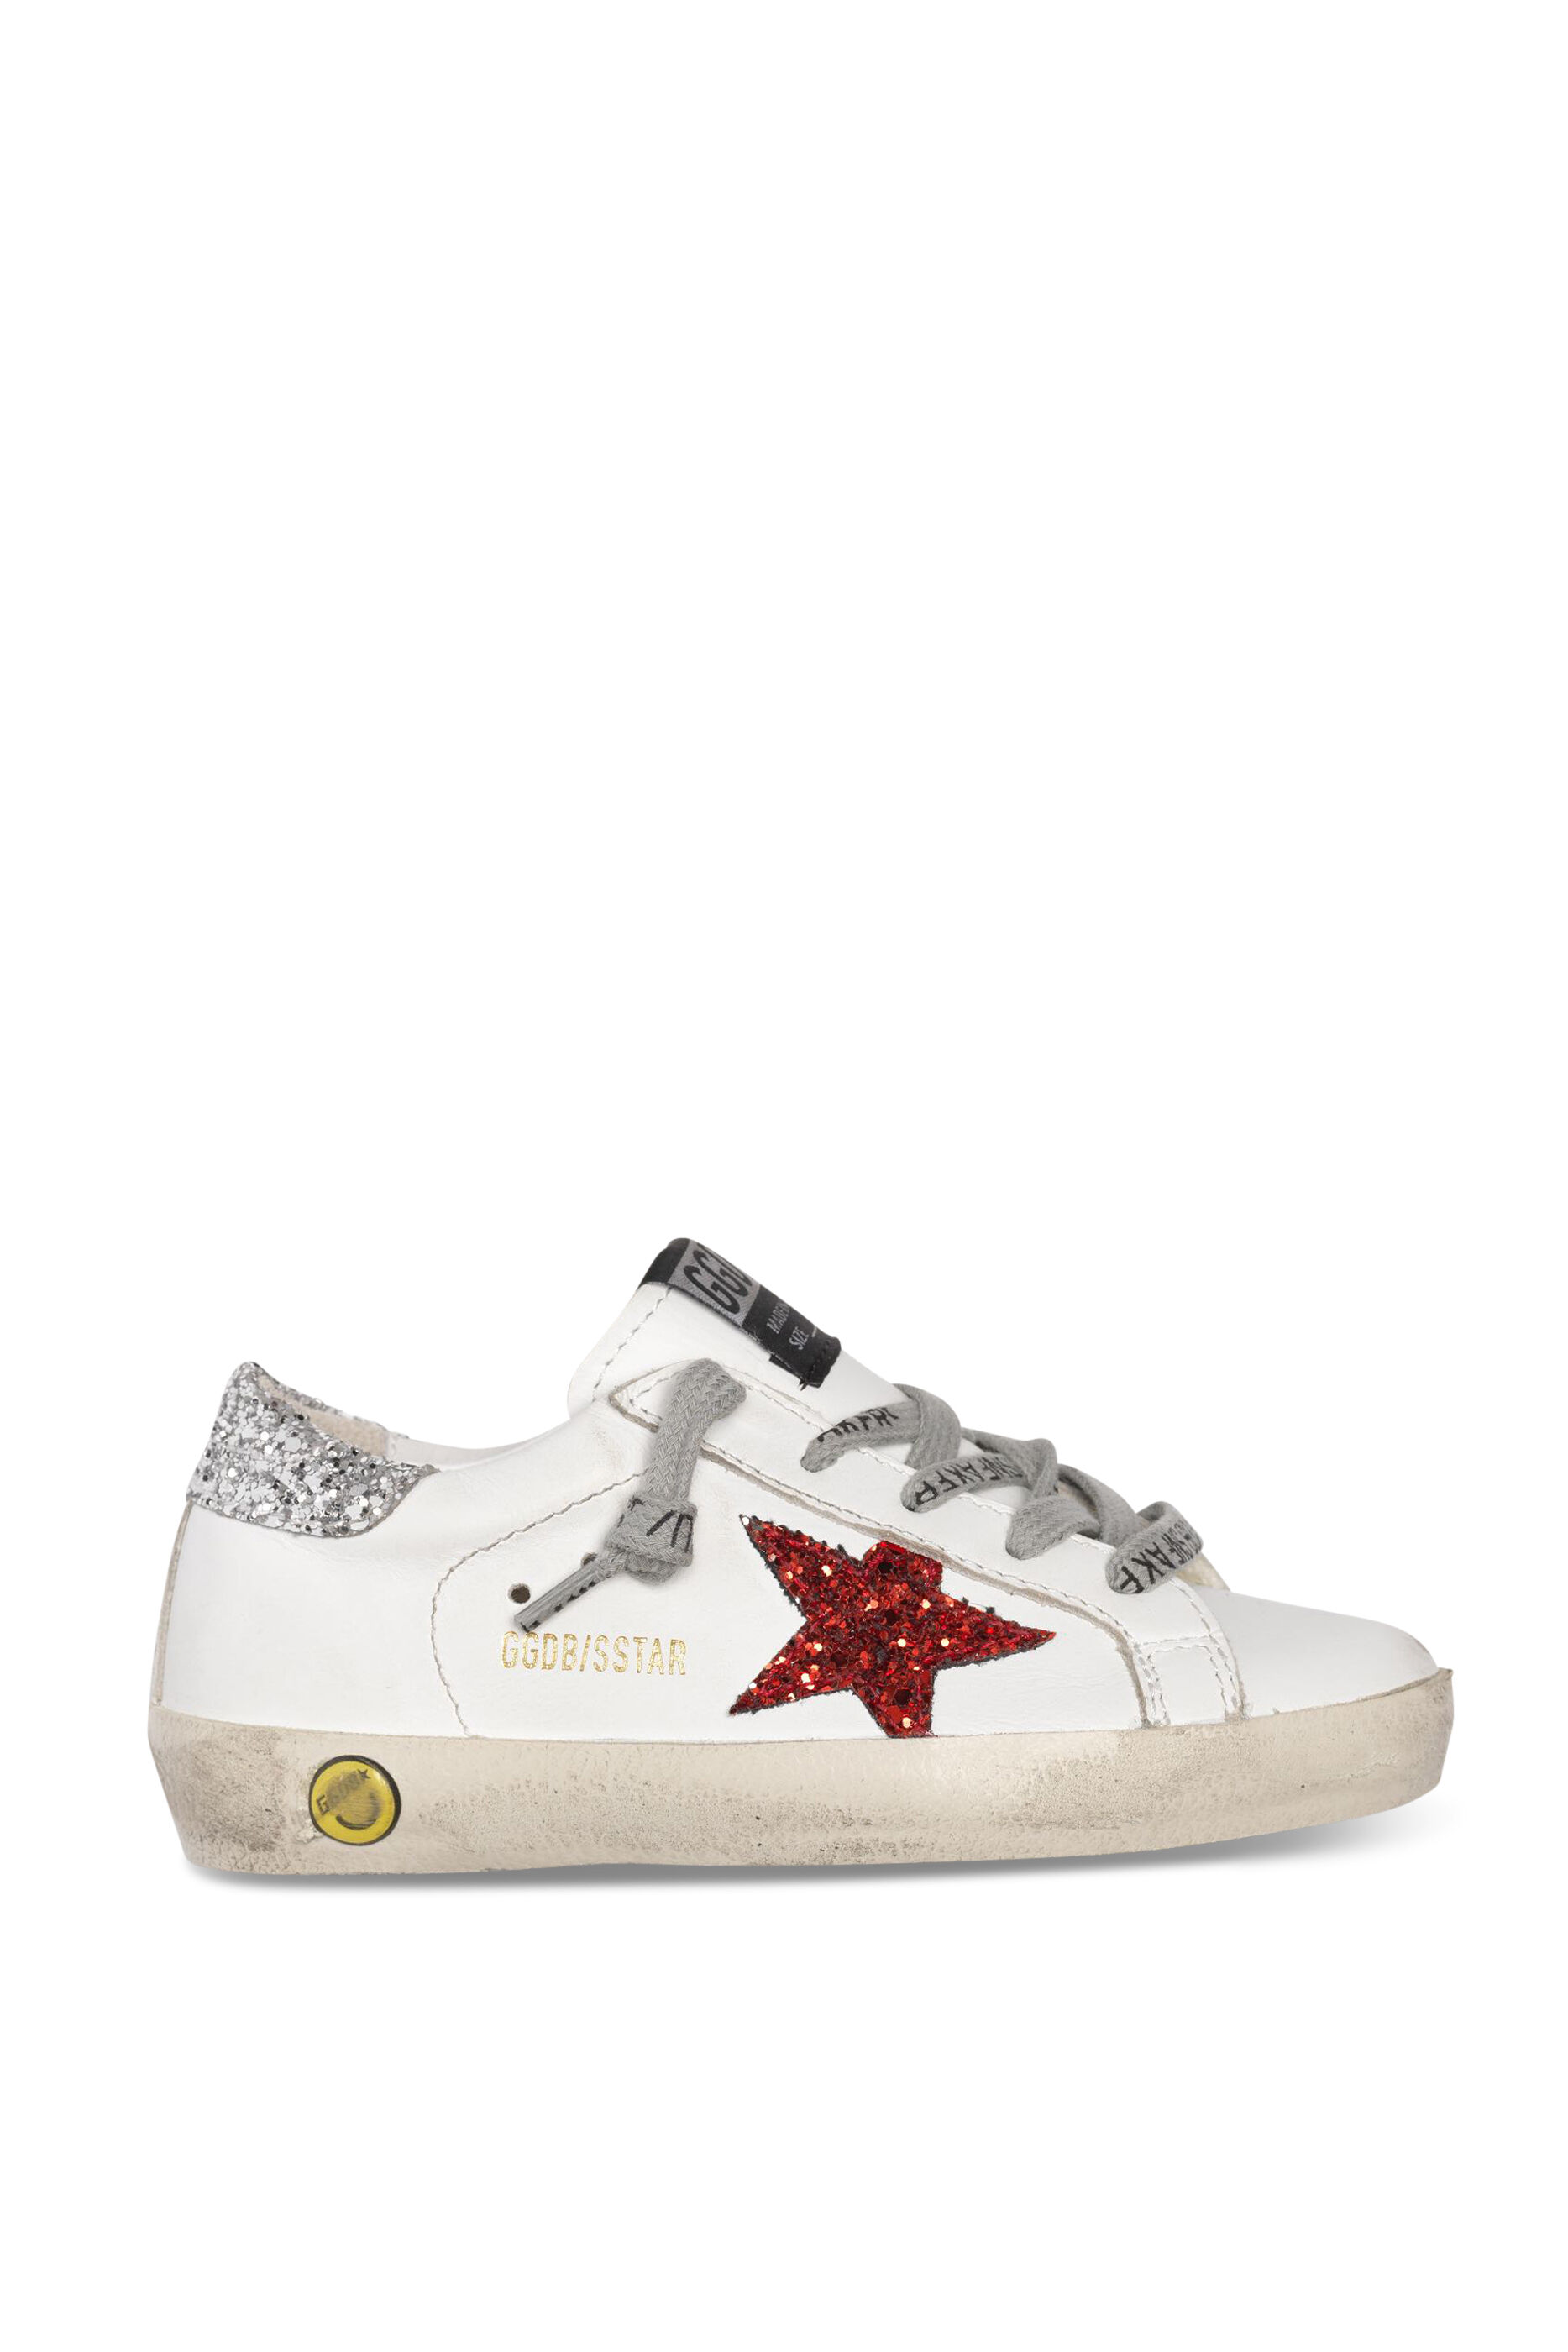 stores that sell golden goose sneakers